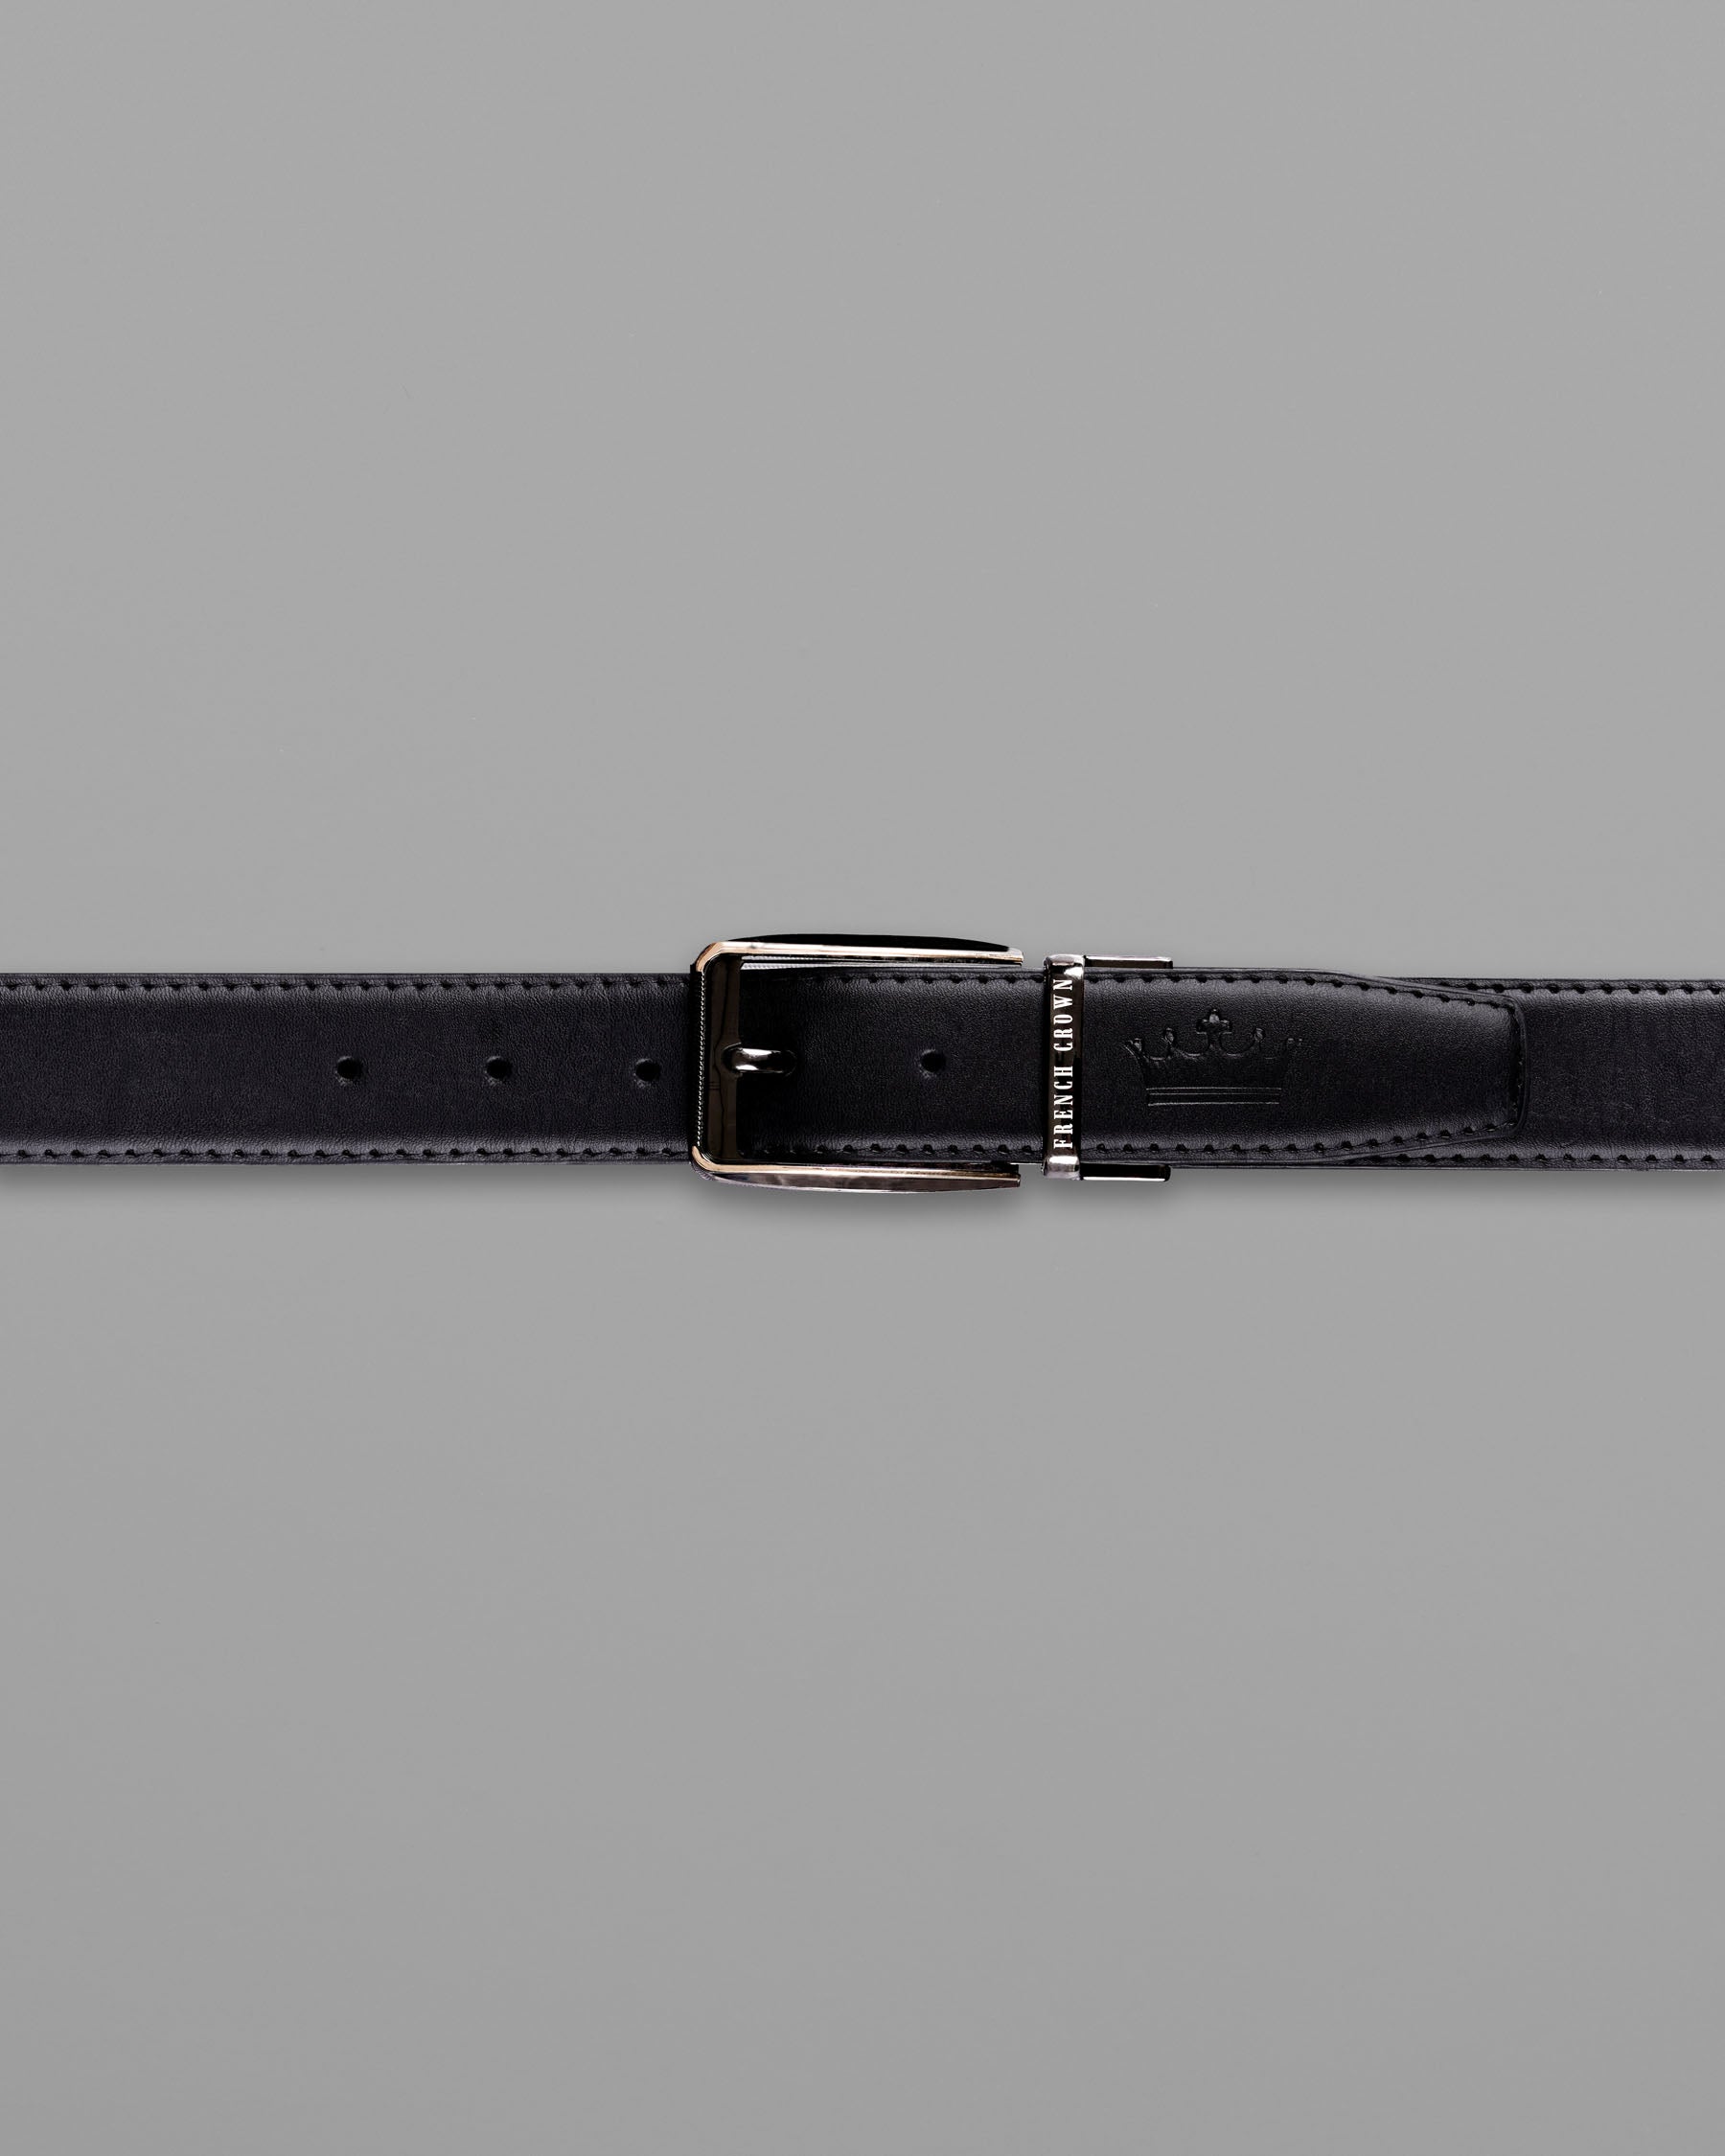 Glossy Grey with golden Patterned buckle Reversible Black and Brown Vegan Leather Handcrafted Belt